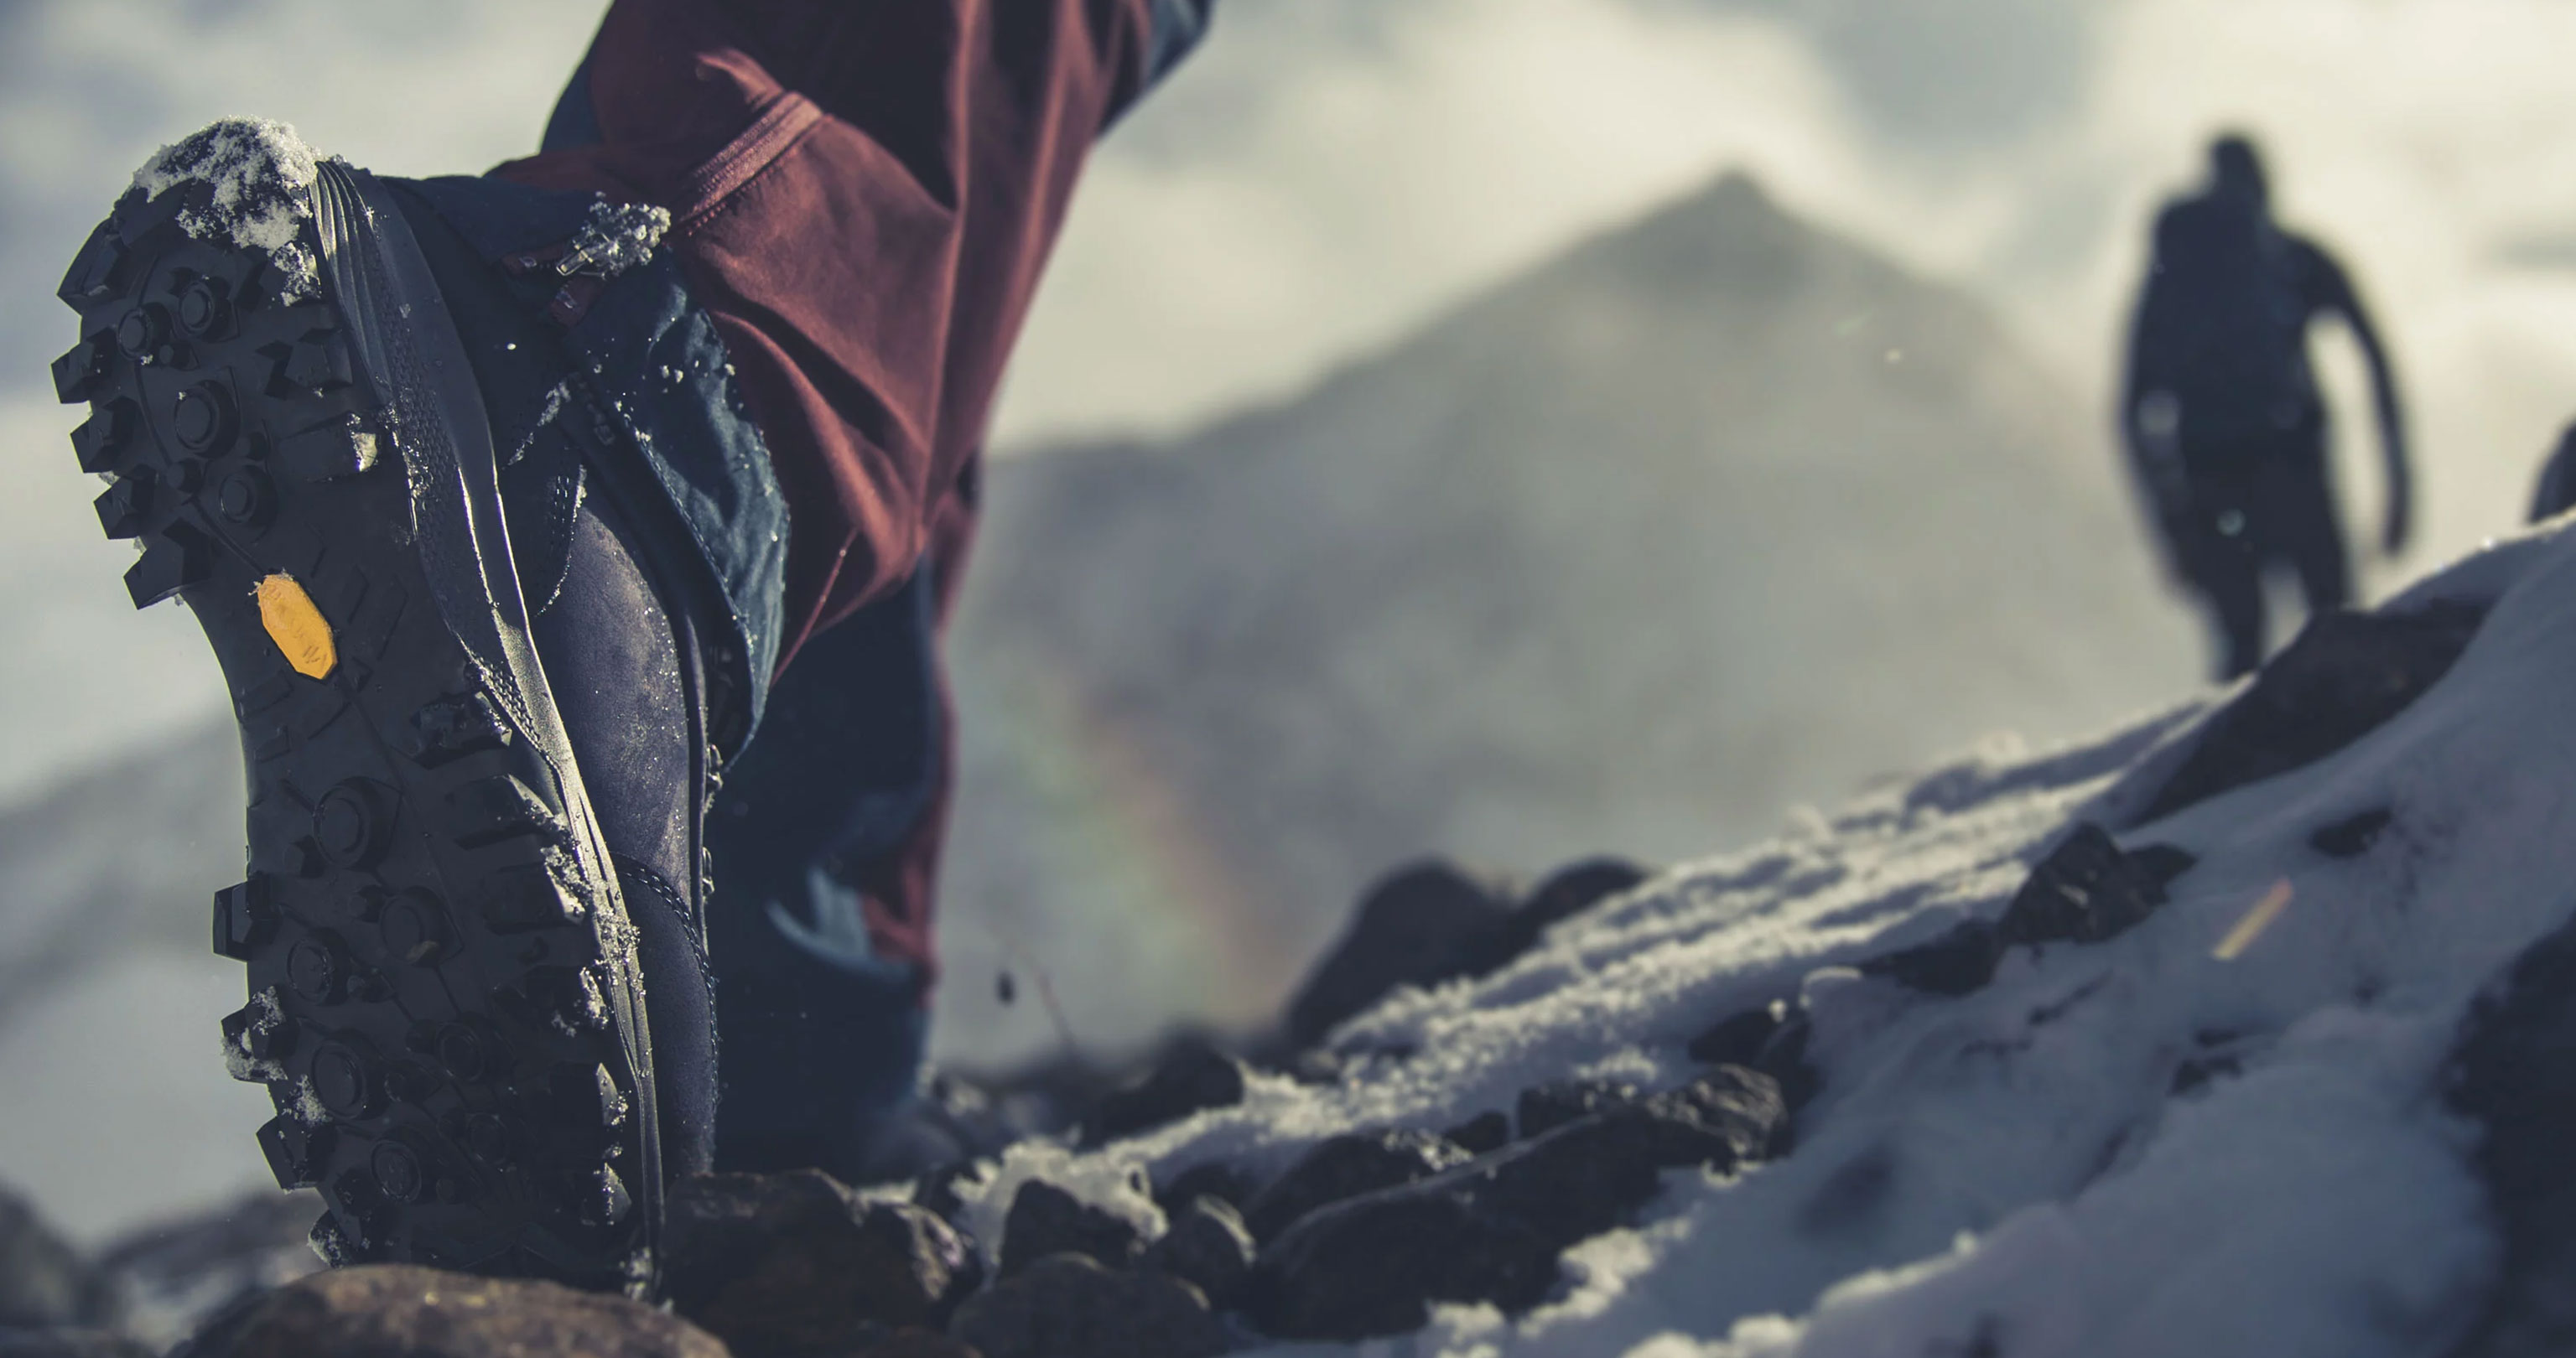 Hiking boots with Vibram soles in winter conditions in the mountains